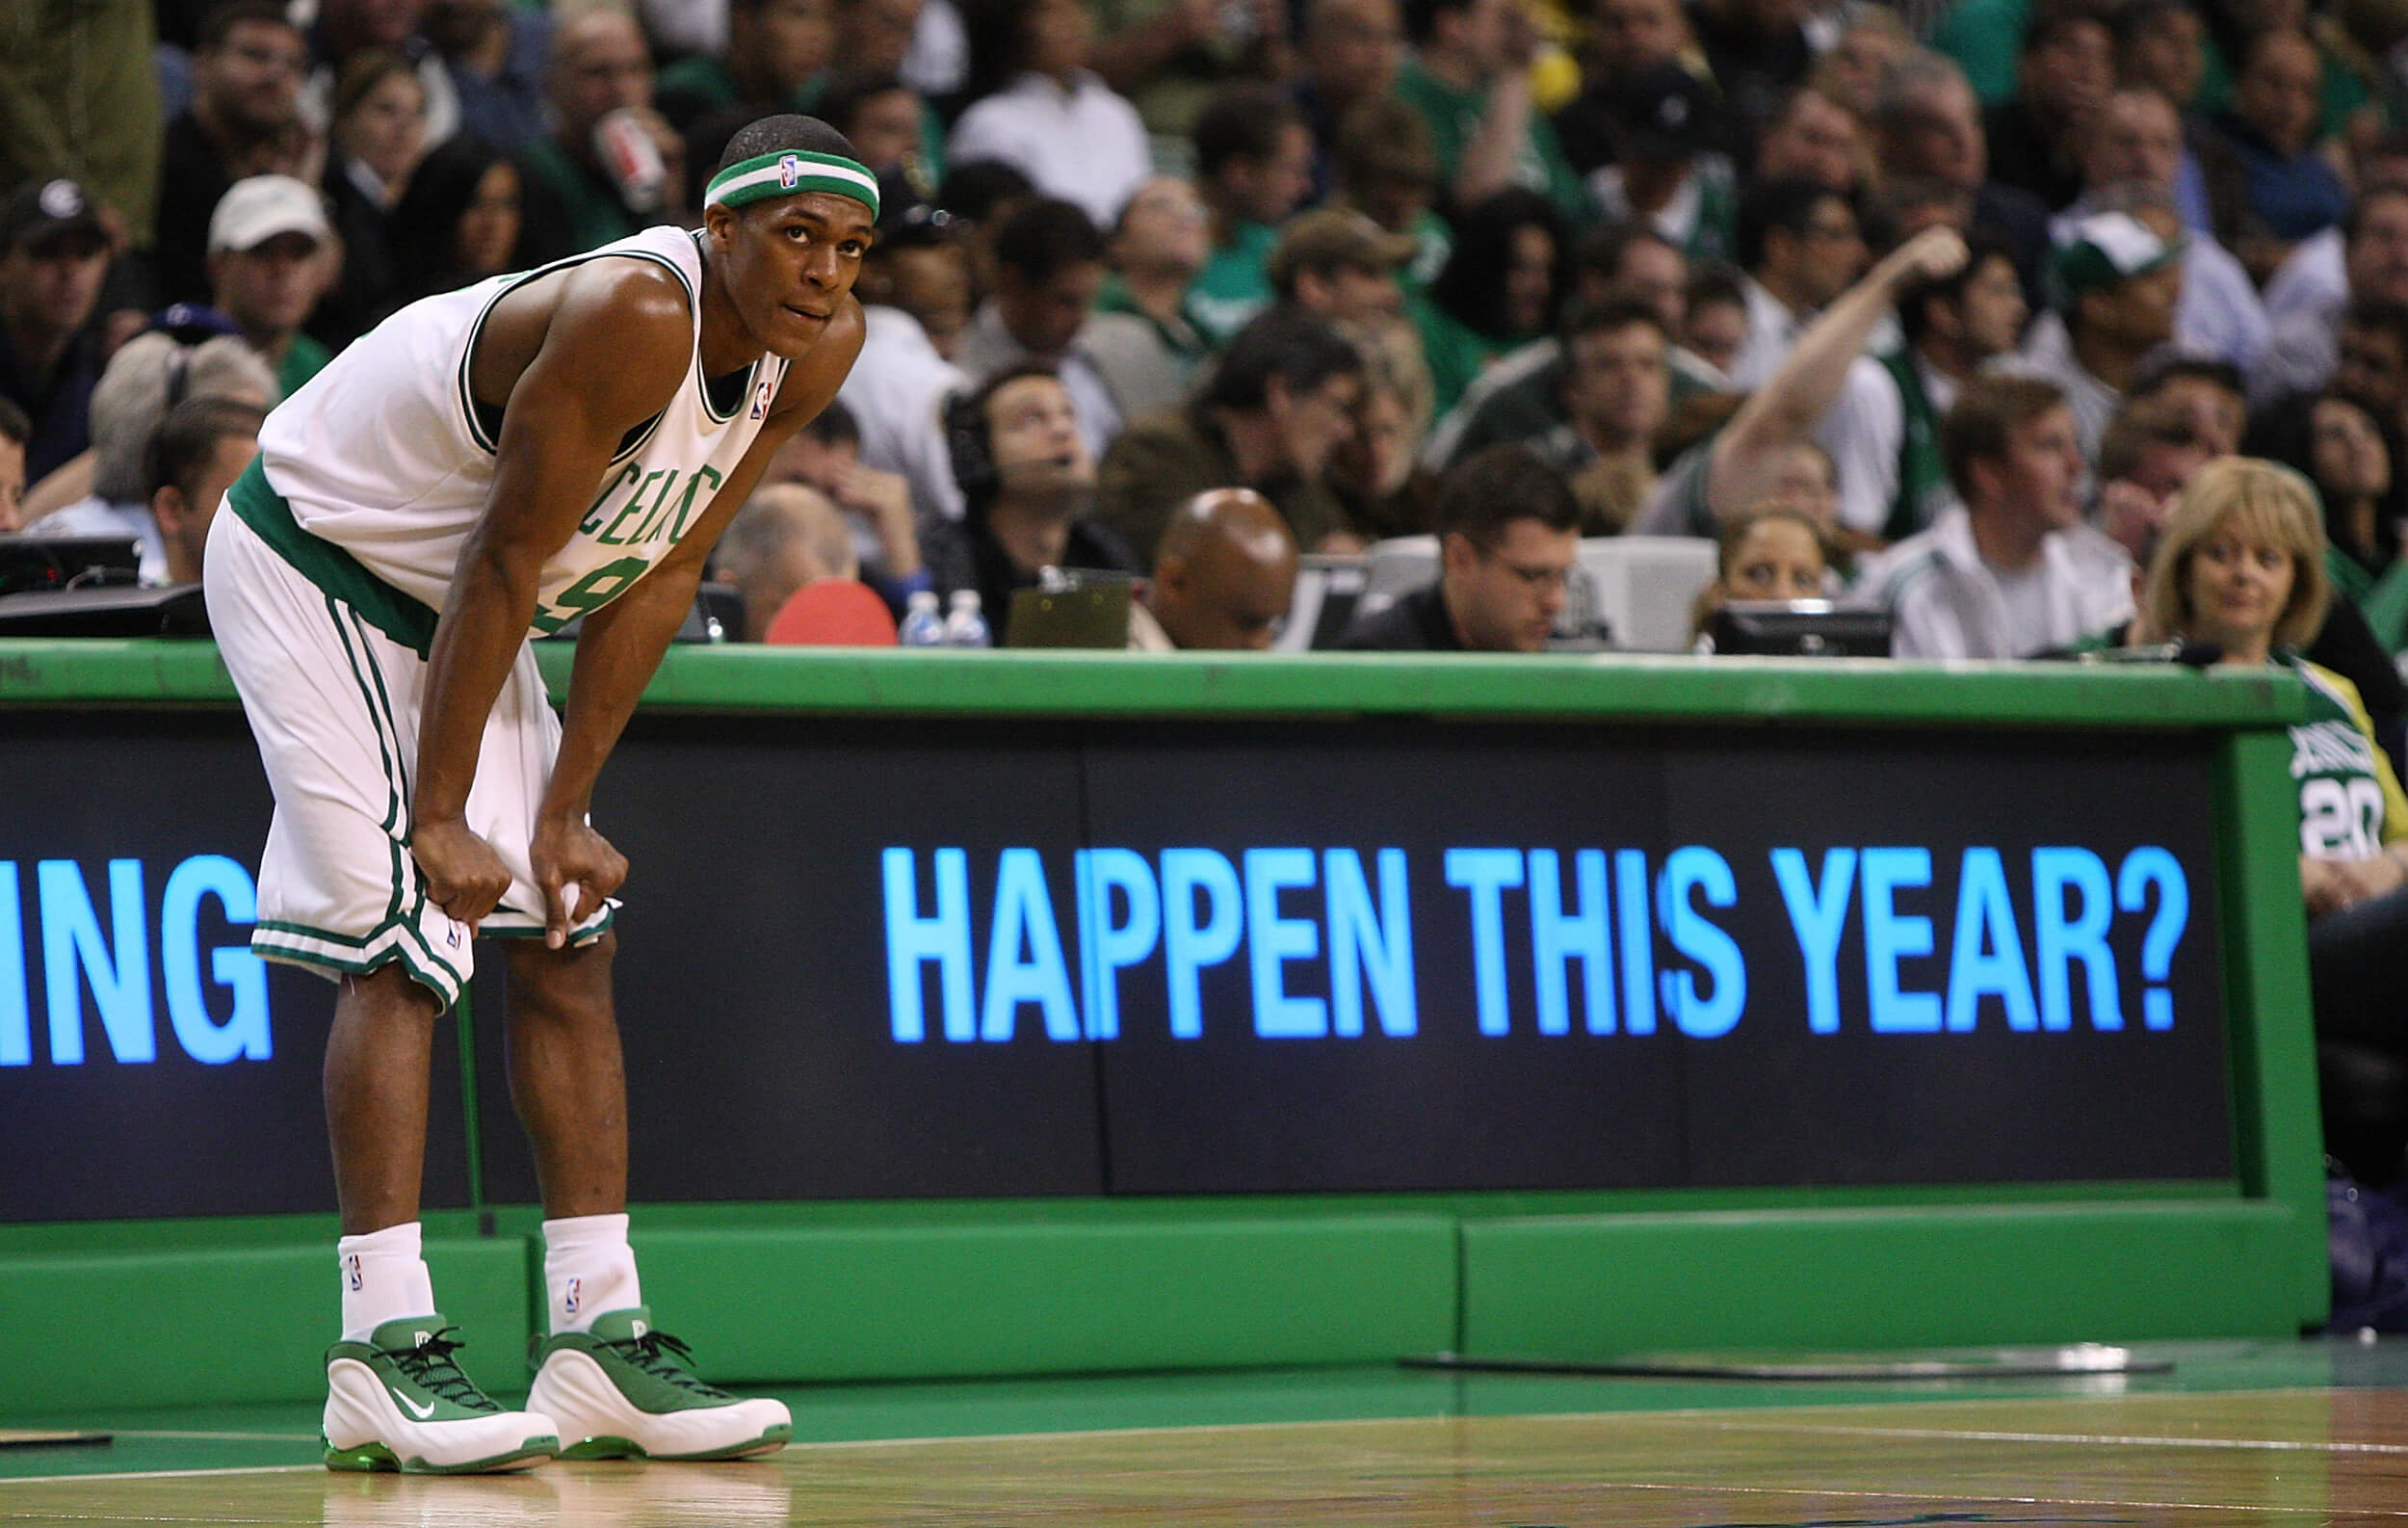 Boston Celtics guard Rajon Rondo after a 95-90 loss in Game 1 of the Eastern Conference Semifinals in 2009.